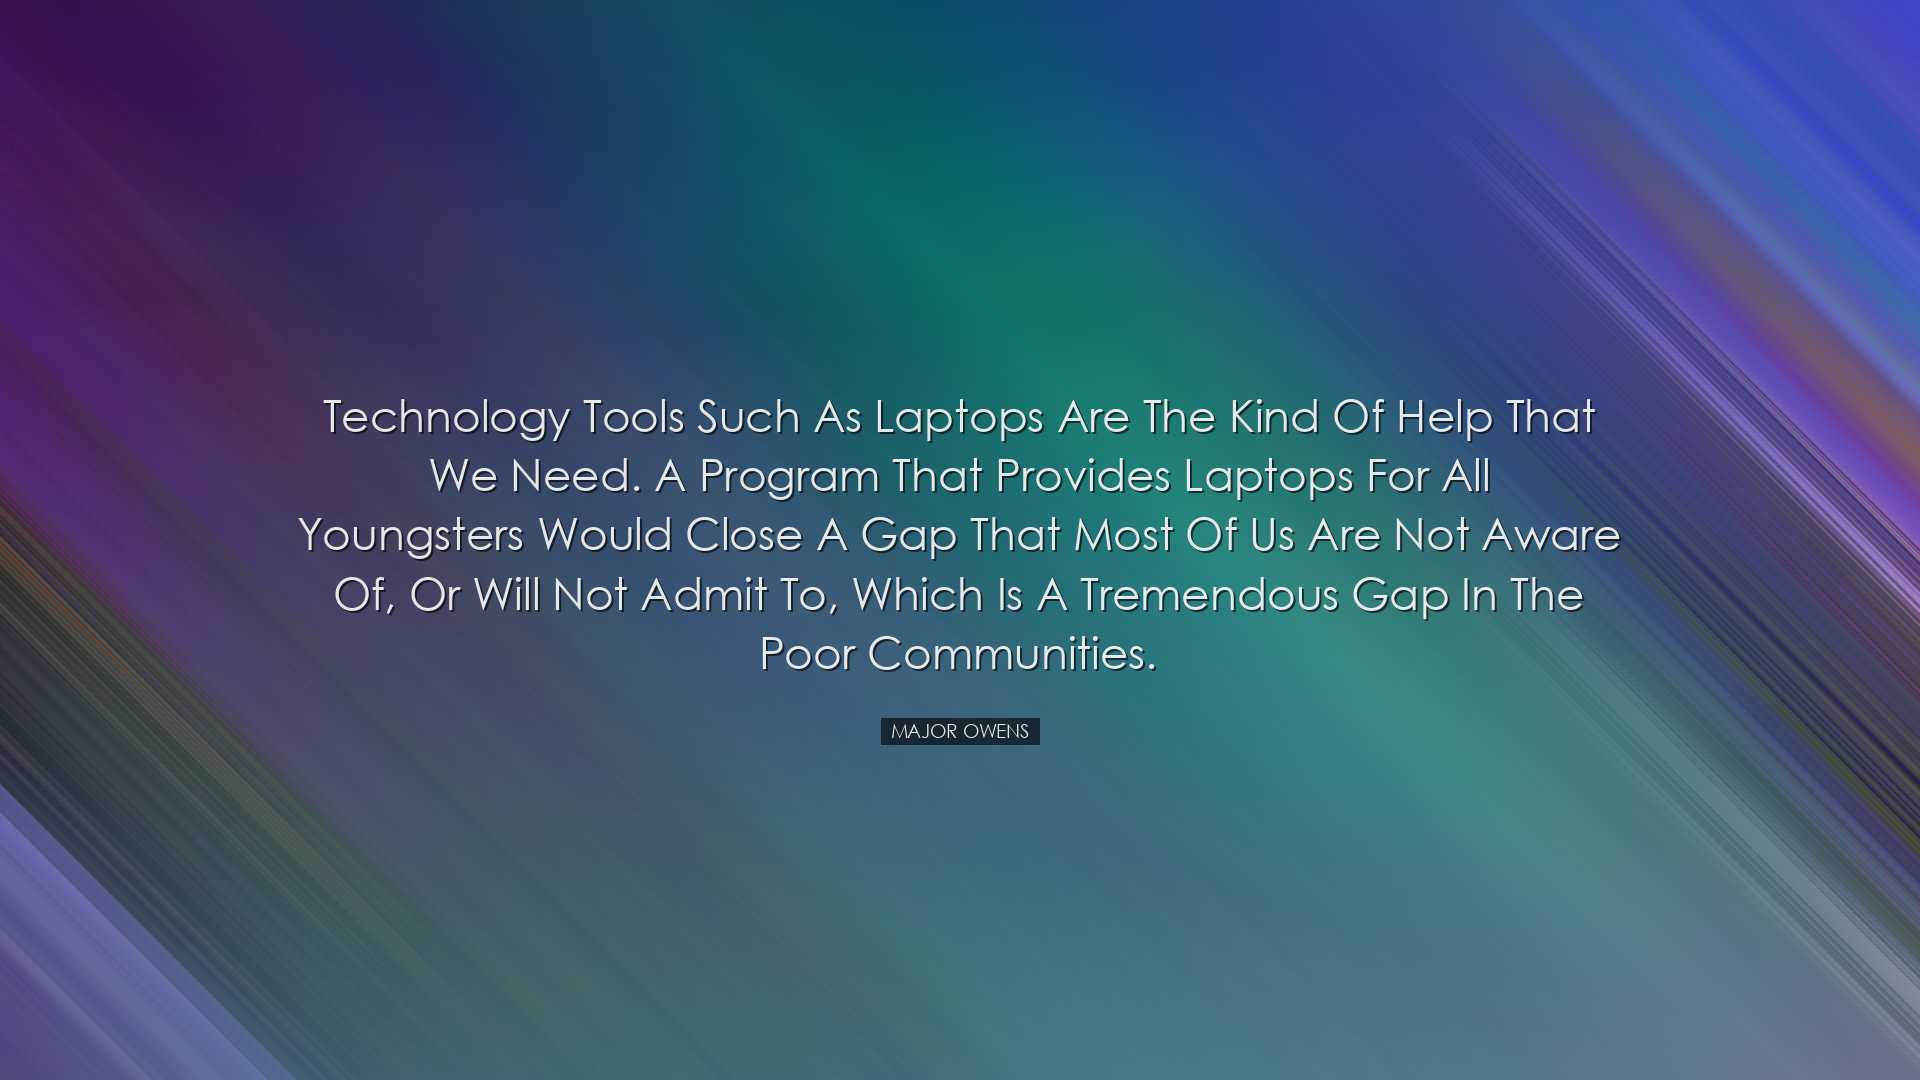 Technology tools such as laptops are the kind of help that we need